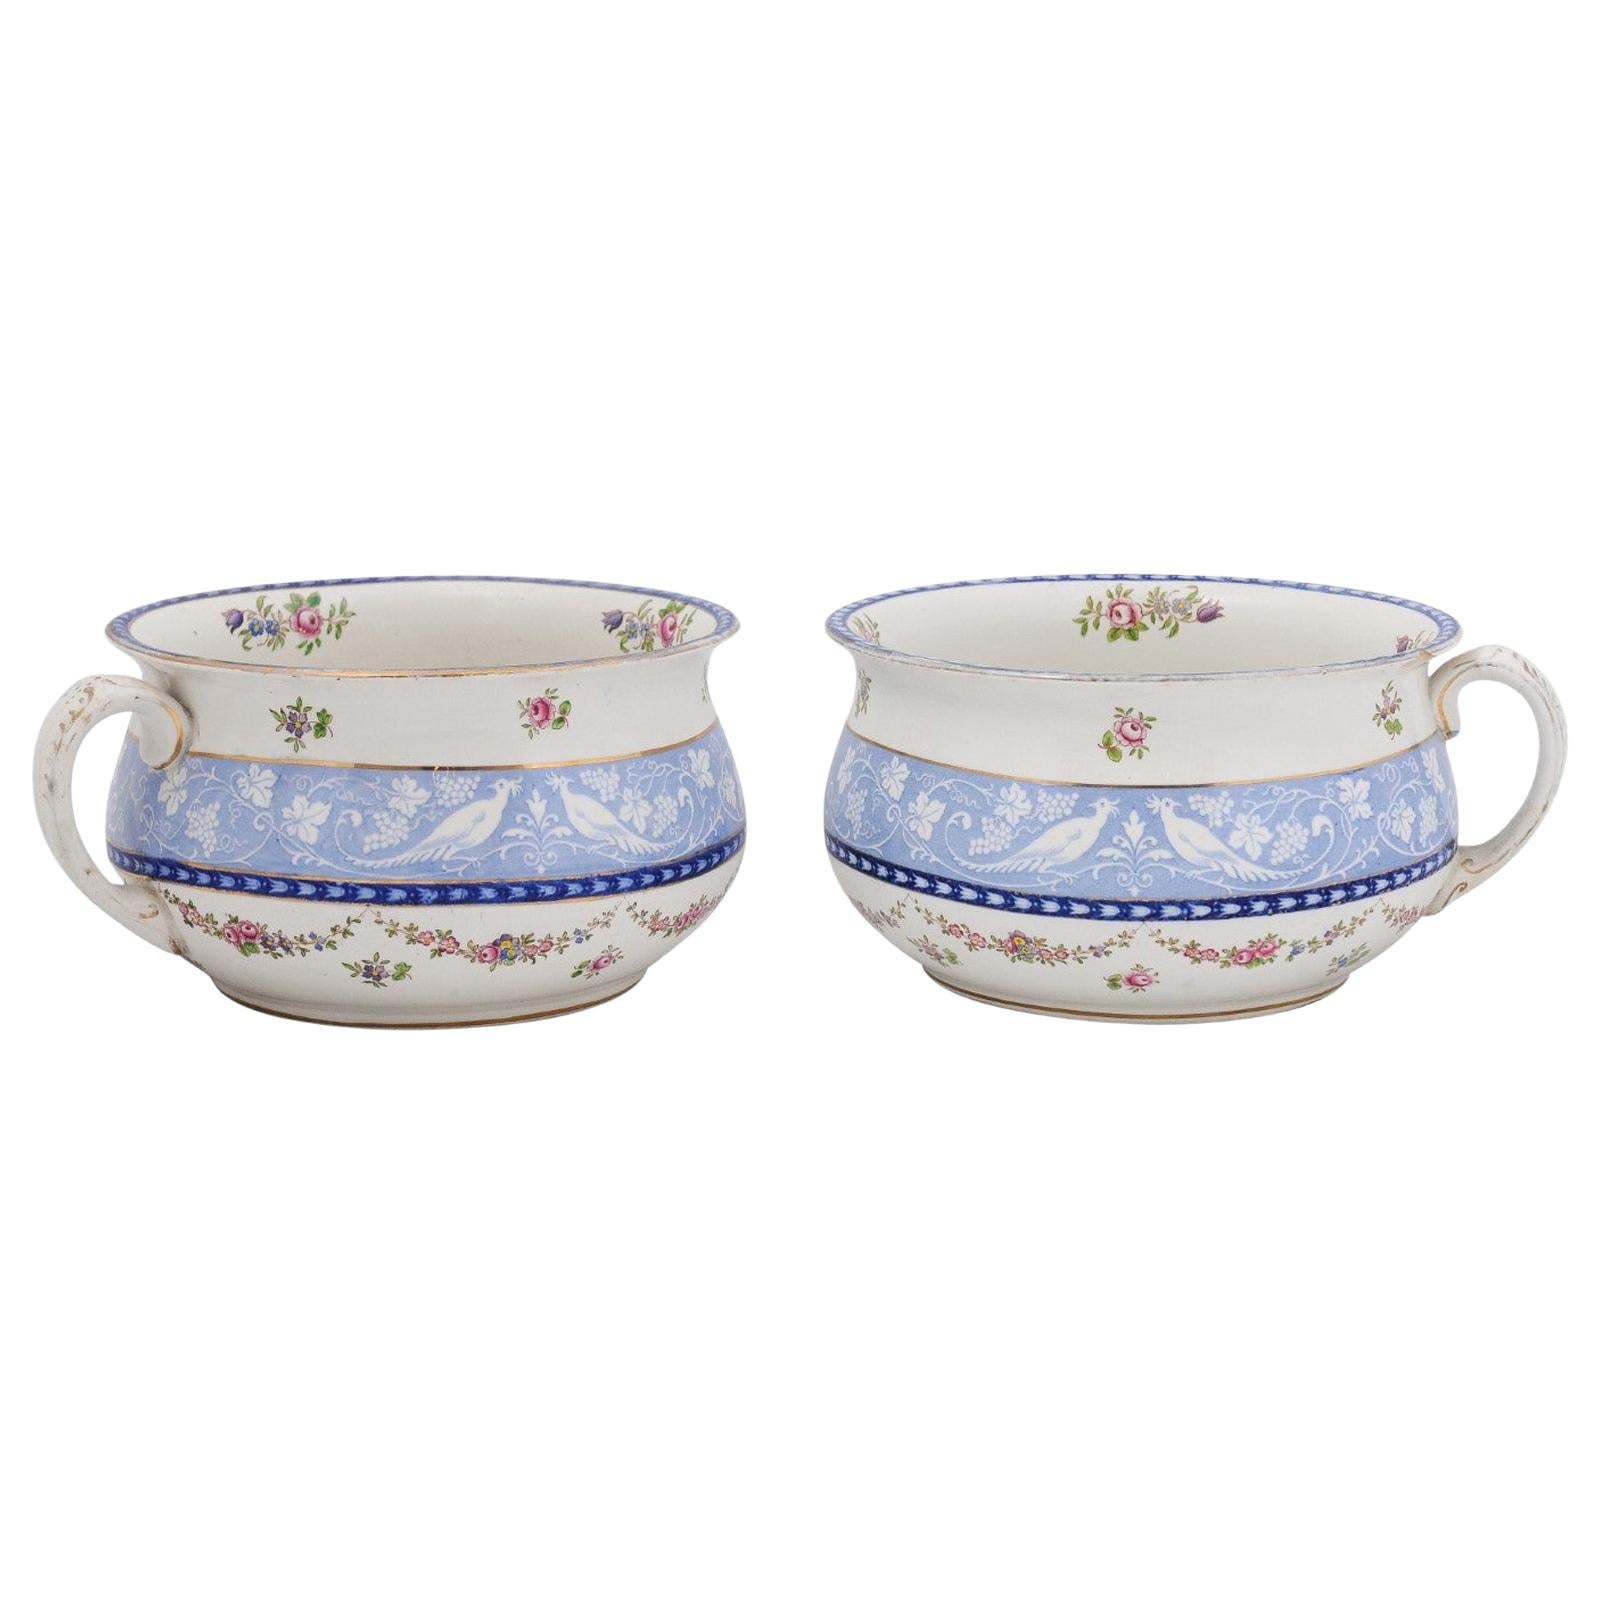 Pair of English Booths Blue and White China Bowls Produced for Harrods in London